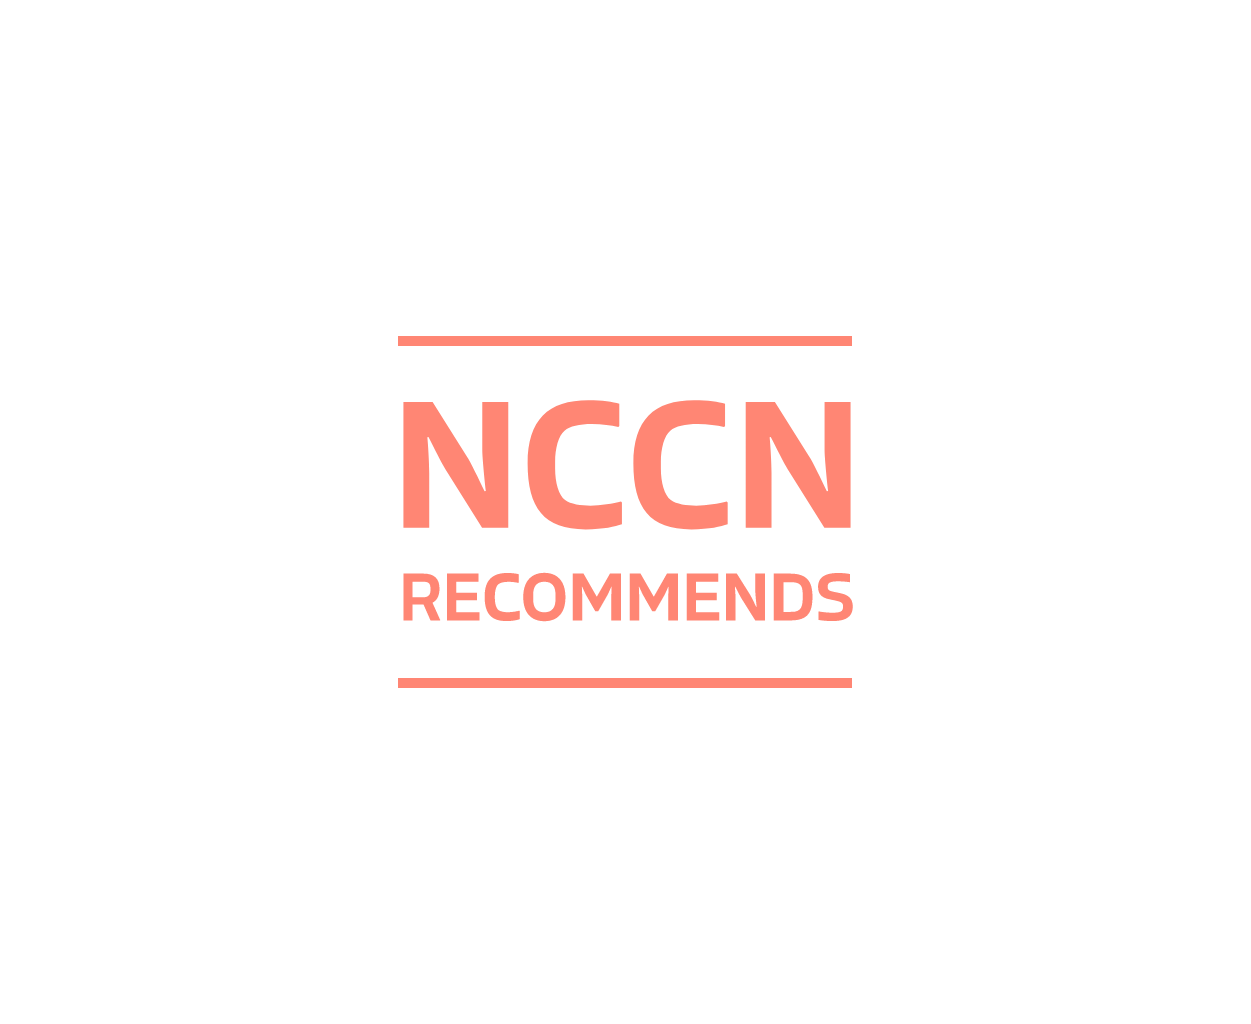 Recommended by National Comprehensive Cancer Network® (NCCN®) Category 1.